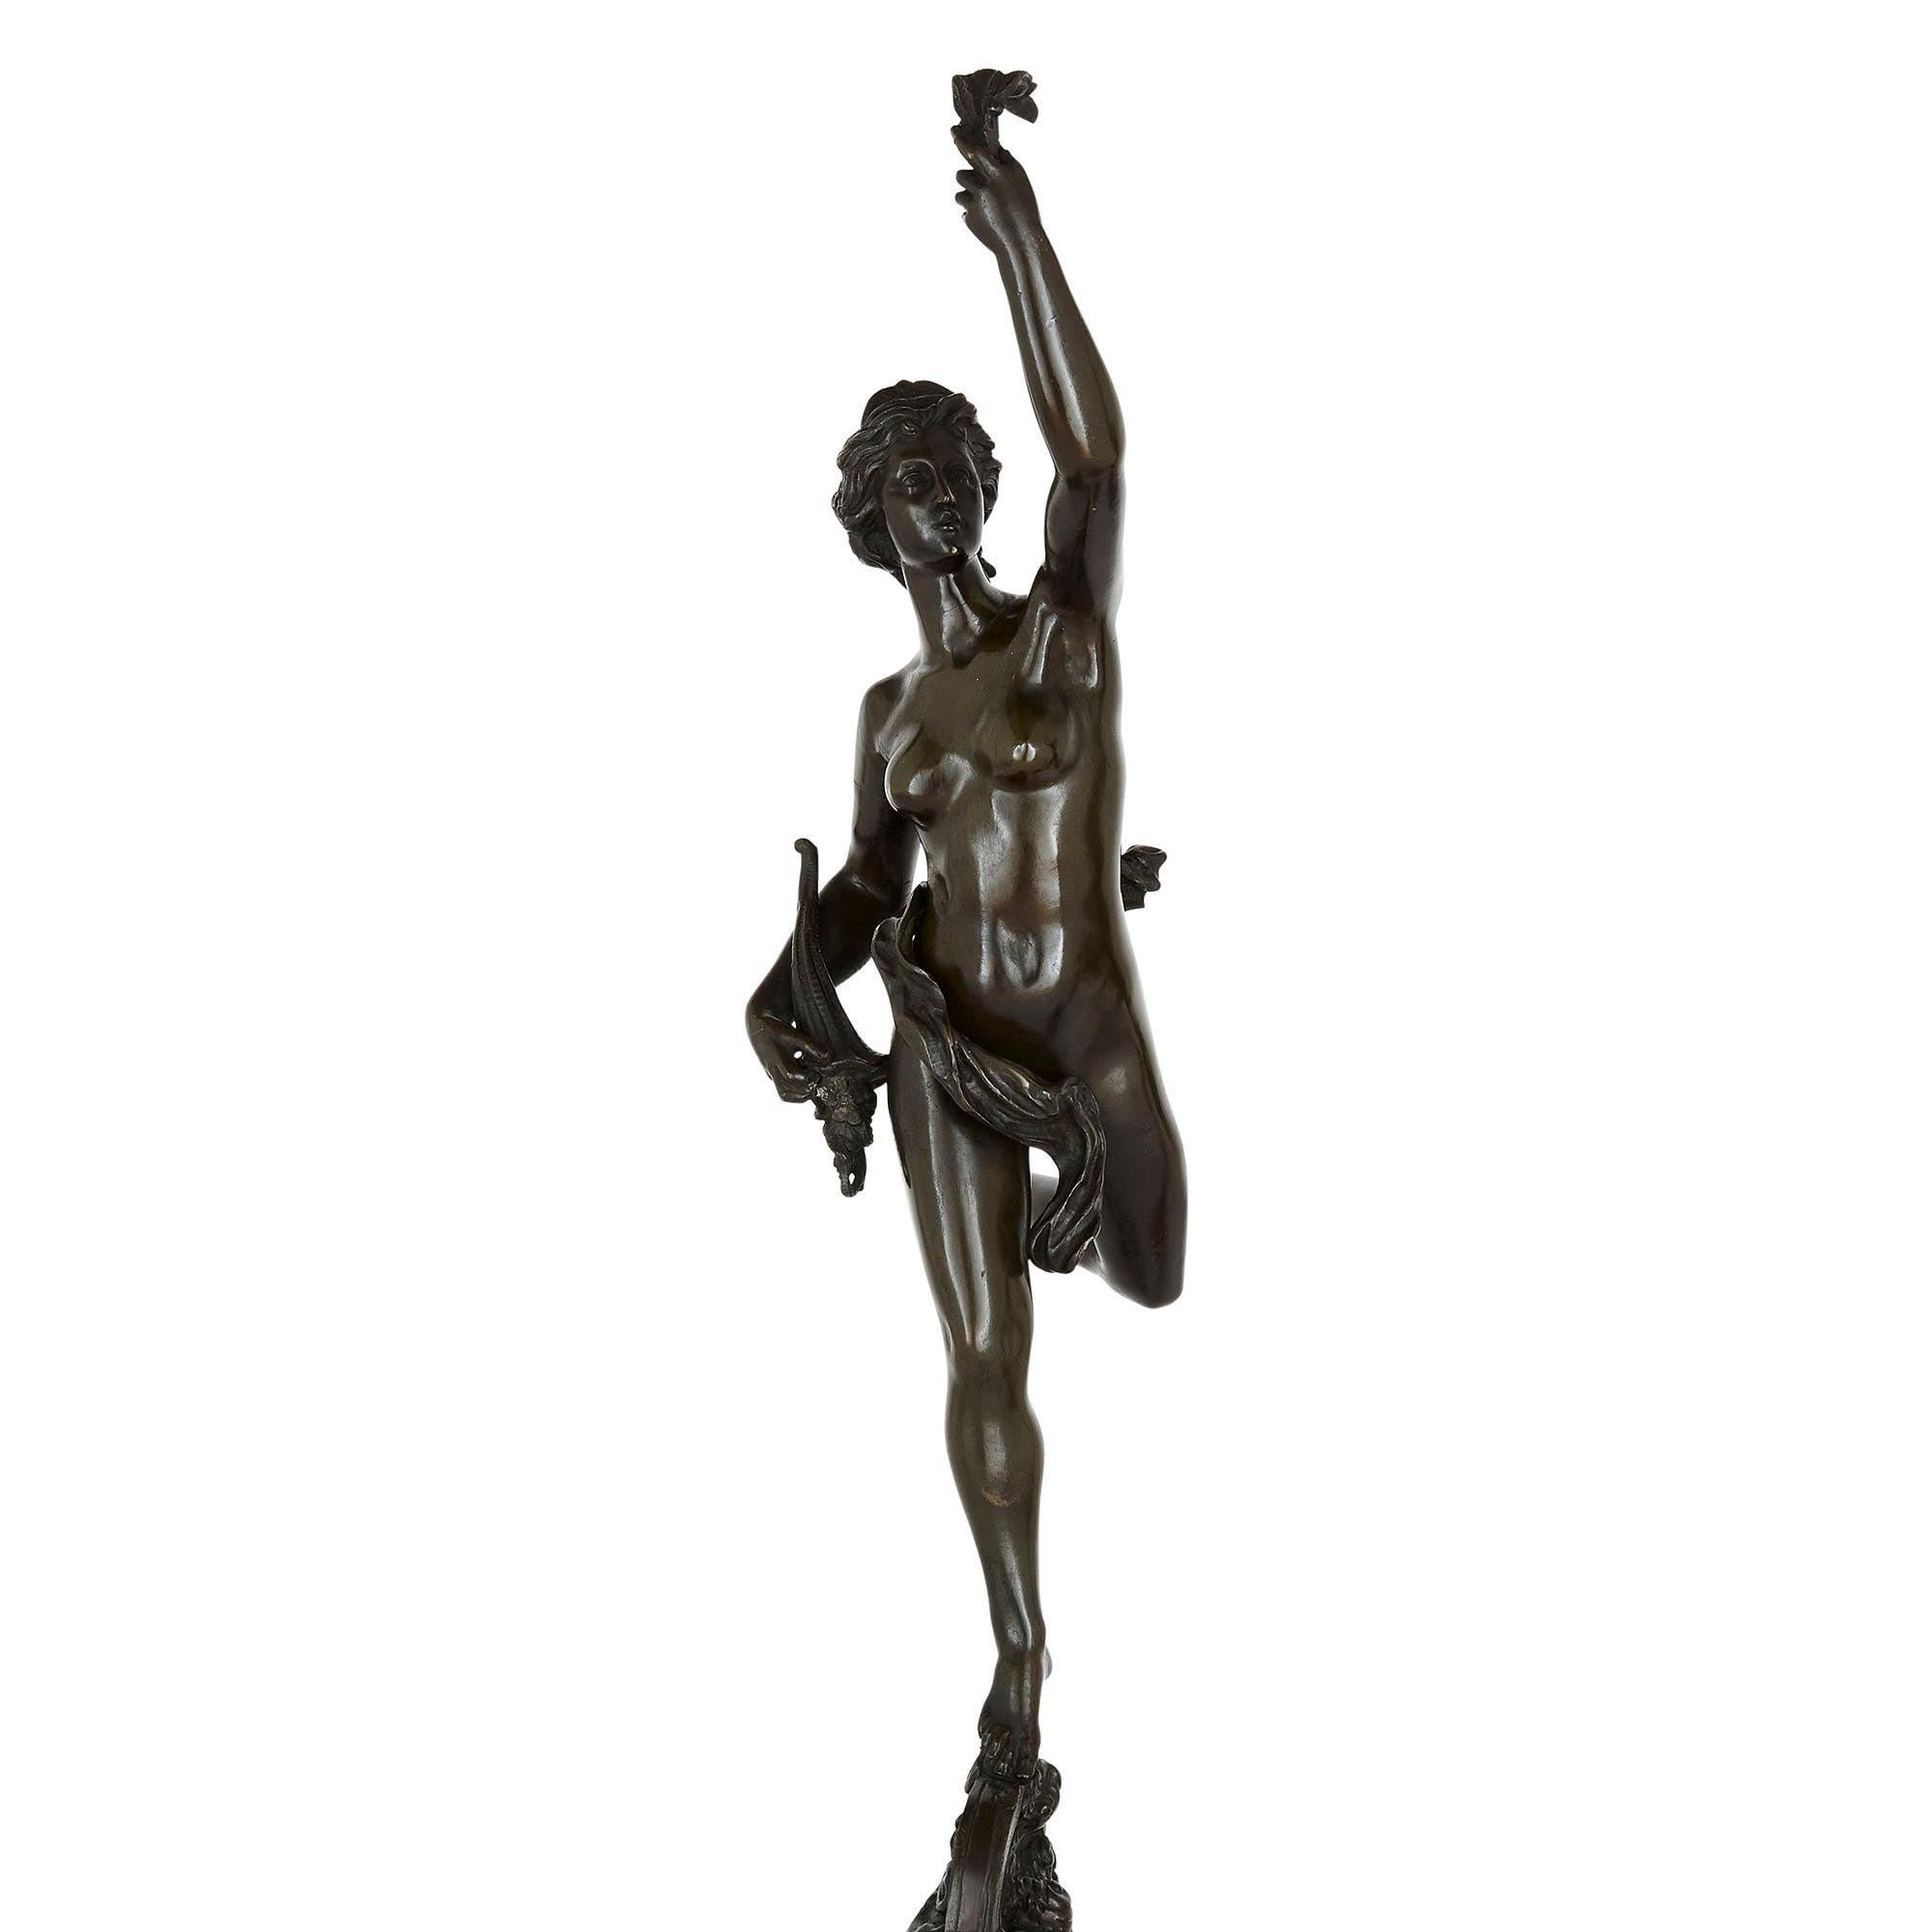 Pair of patinated bronze figures after Giambologna
French, late 19th Century
Mercury: Height 84cm, width 17cm, depth 31cm
Fortuna: Height 84.5cm, width 17cm, depth 29cm

The patinated bronze figures are pictured in the nude, adopting active